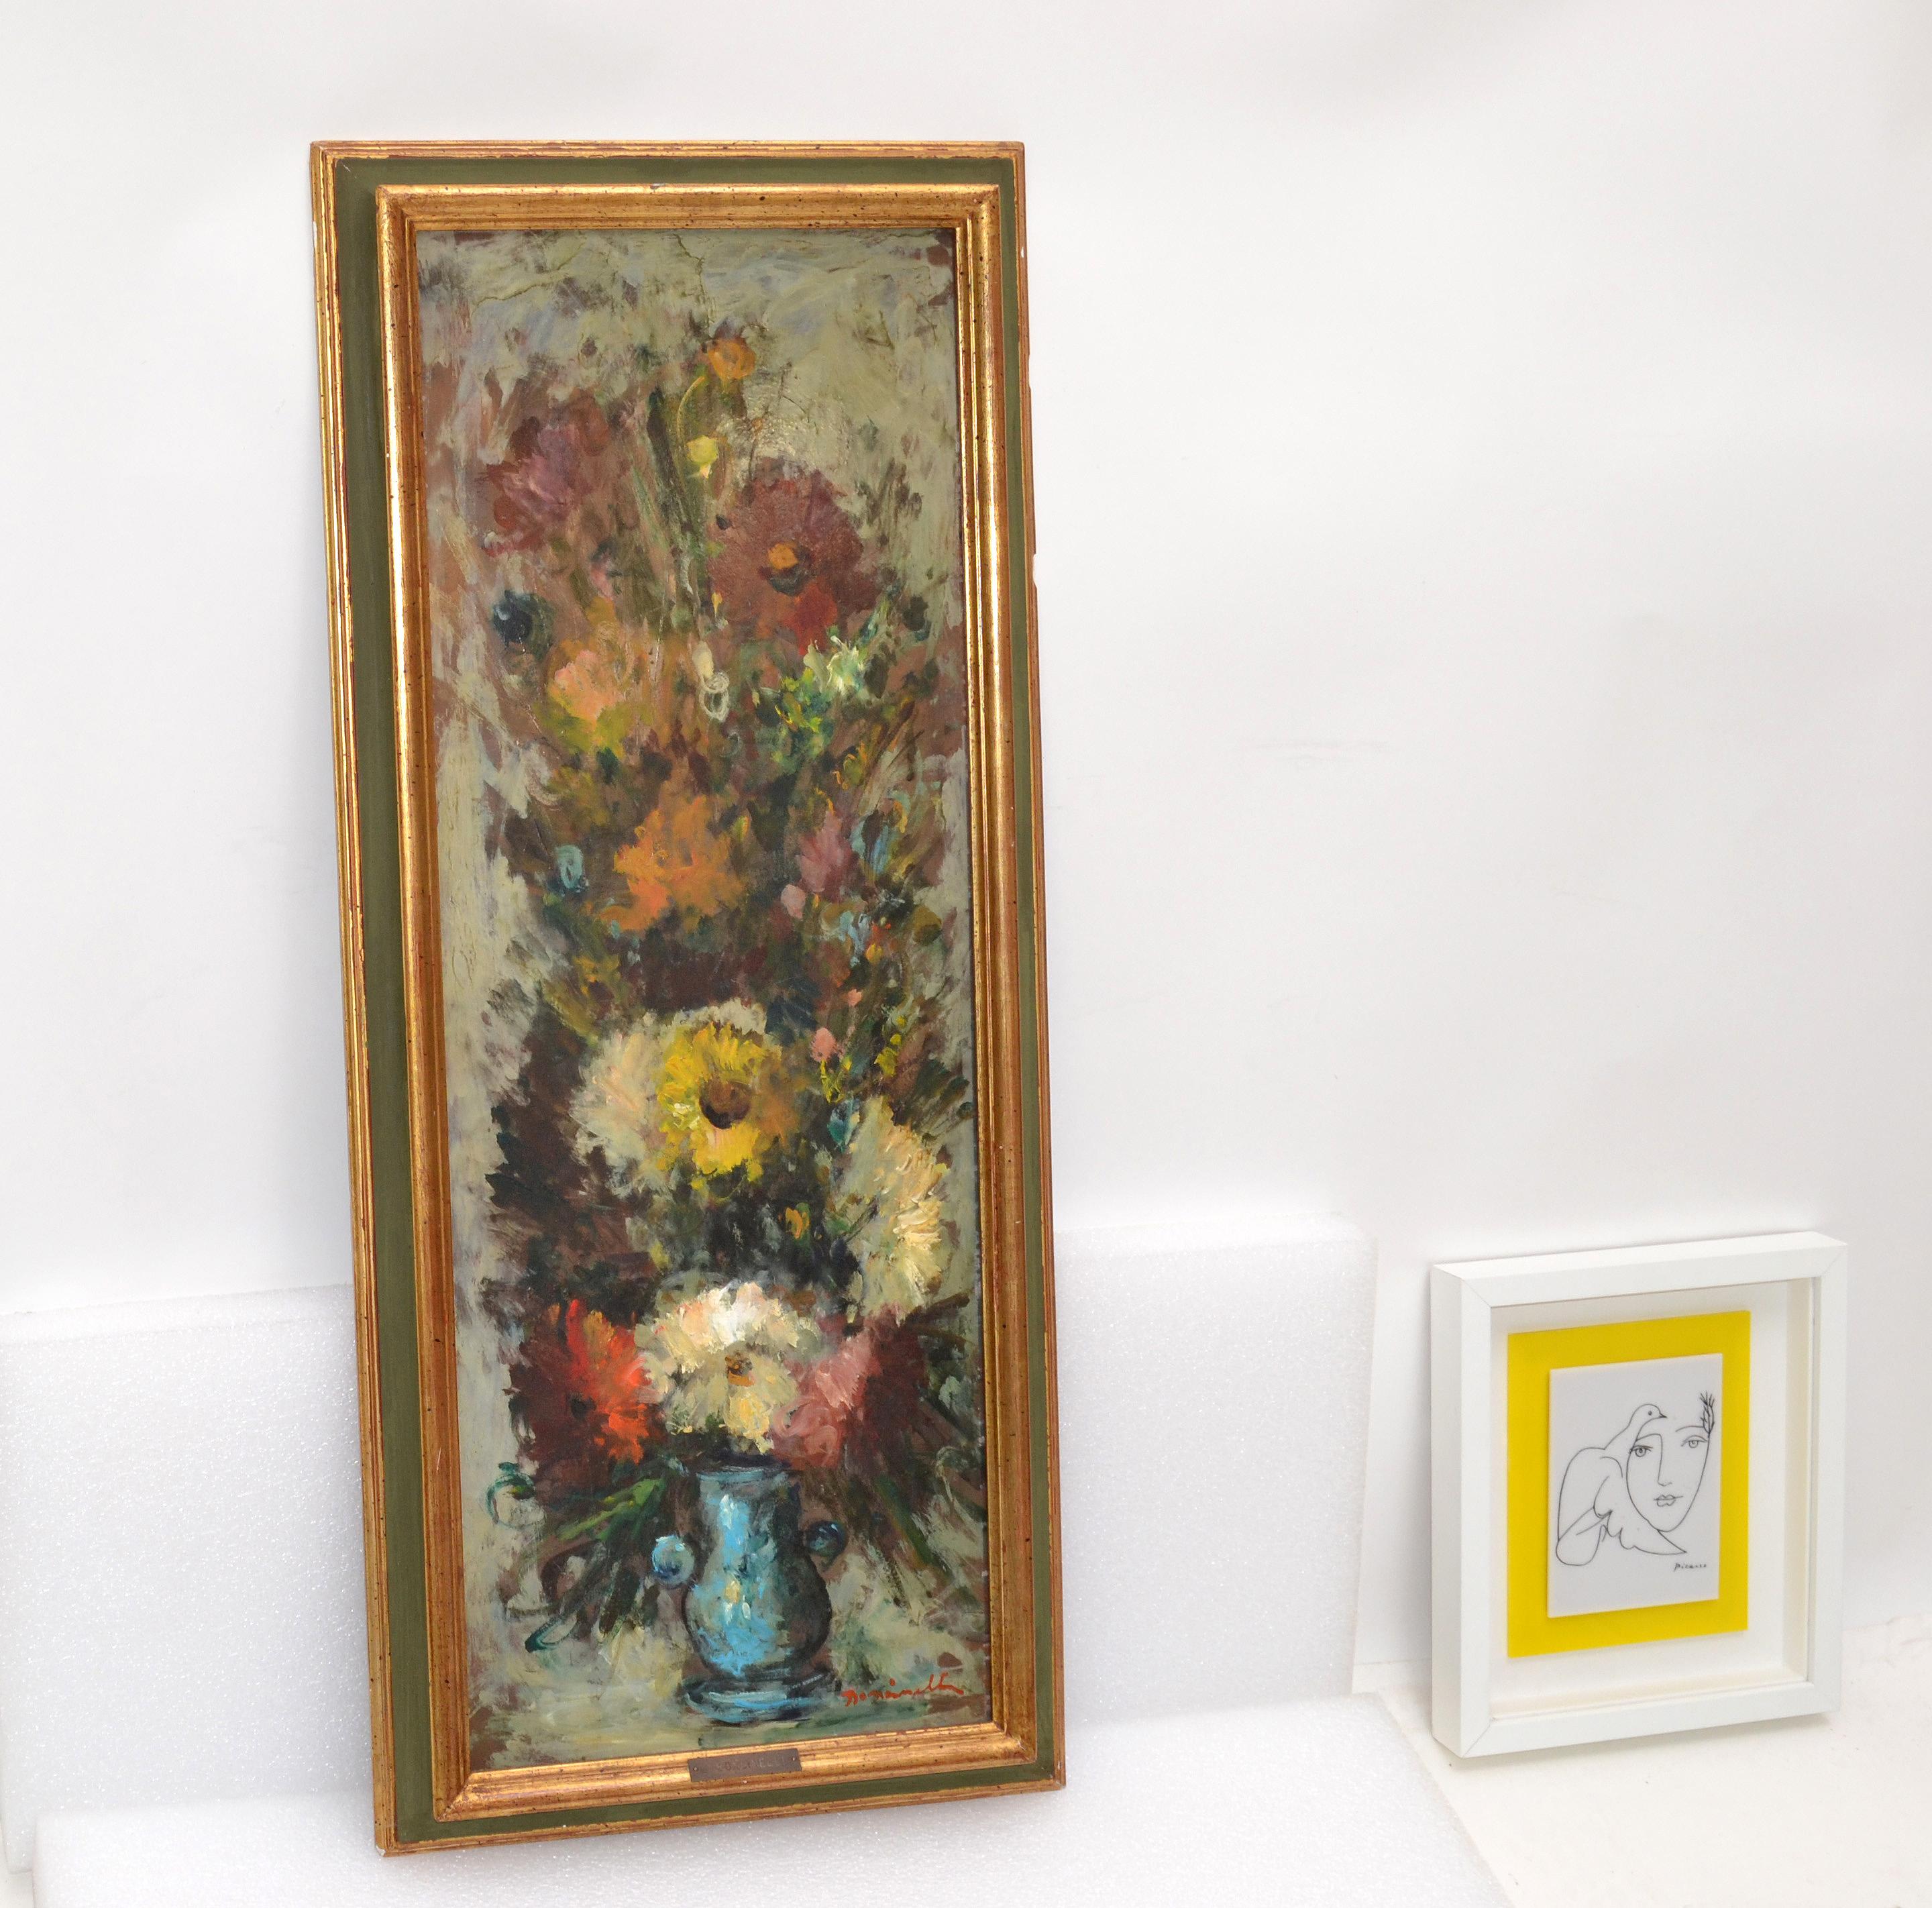 Ornate Gilt Framed Oil Painting Floral Bouquet Still Life Signed G. Boncinelli  In Good Condition For Sale In Miami, FL